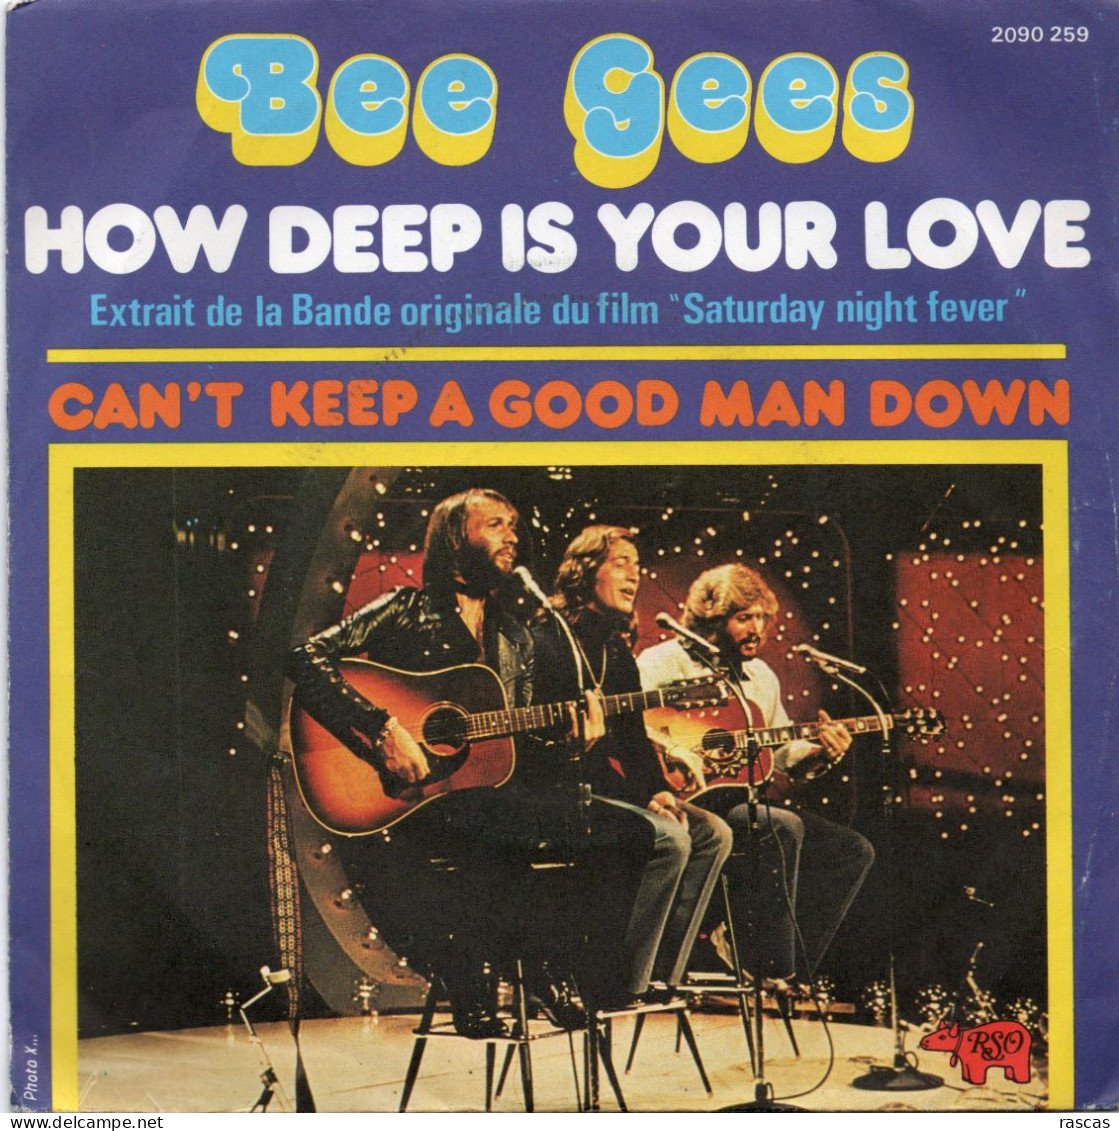 DISQUE VINYL 45 T DU GROUPE LES BEE GEES - HOW DEEP IS YOUR LOVE - Rock